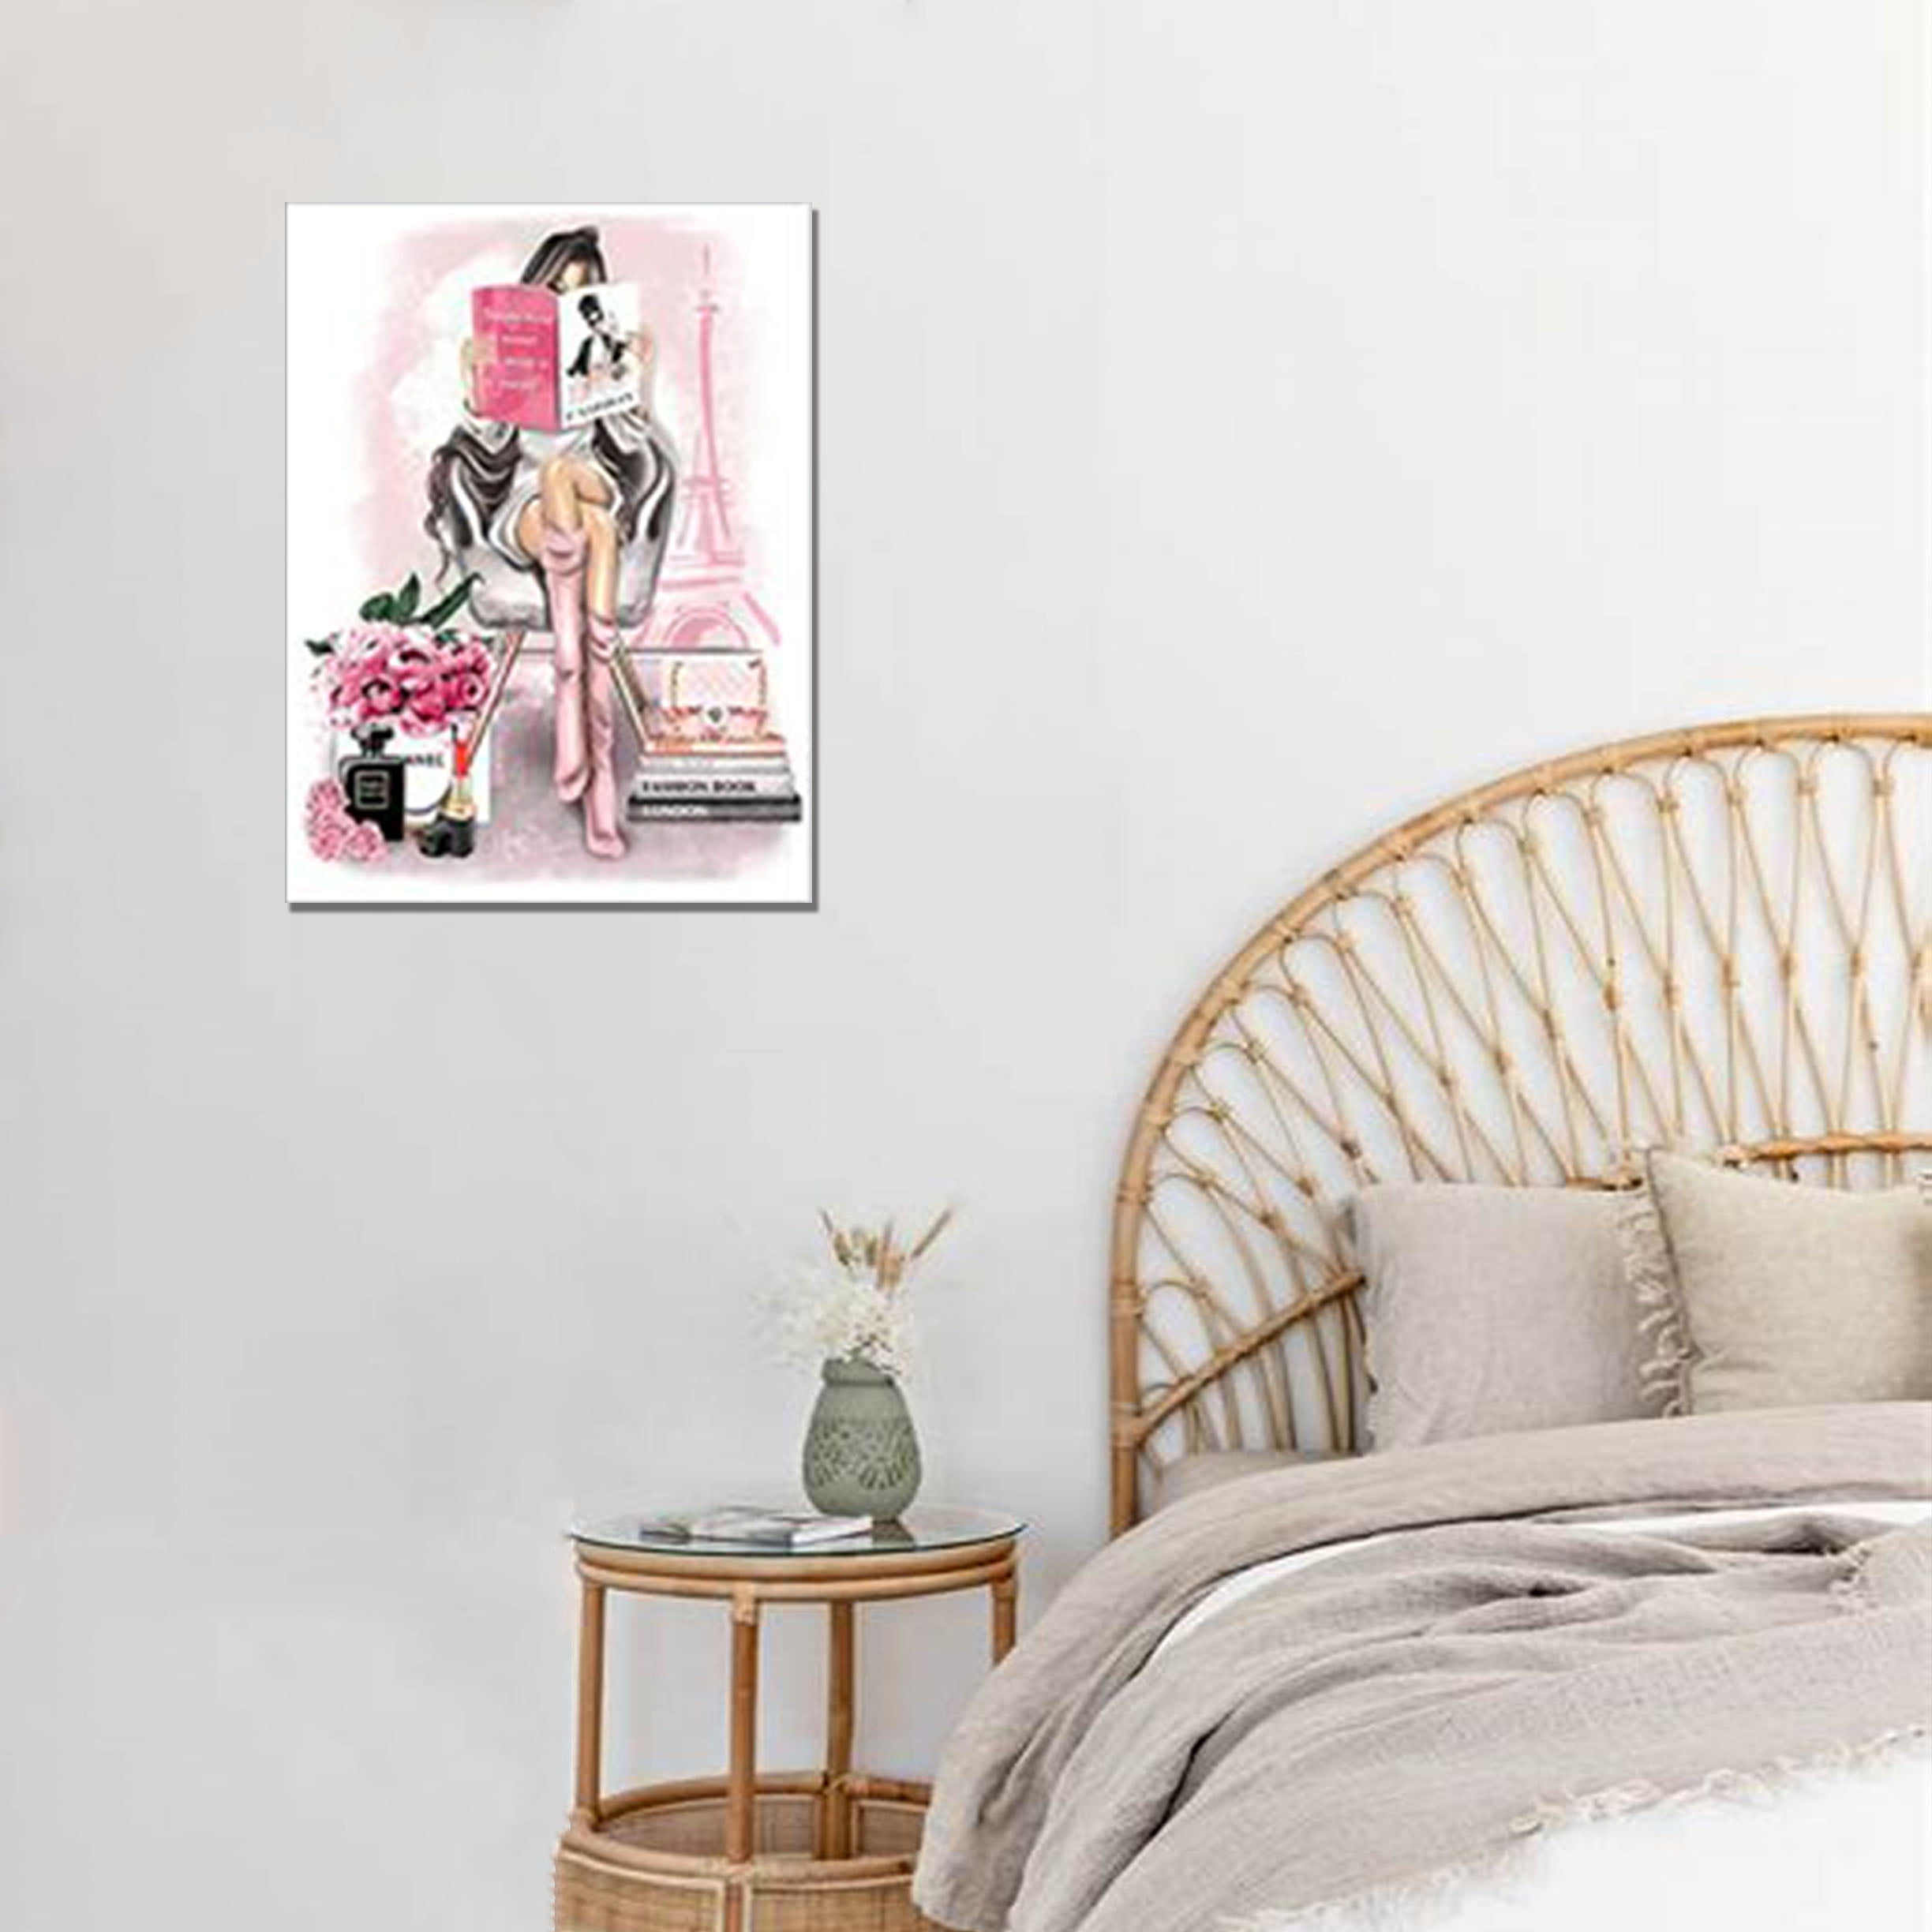  Canvas Wall Art Glam Perfume Chanel Pictures Wall Decor Pink  Flowers And Gold Canvas Wall Art Girl Home Decor For Bedroom Wall Bathroom  Set Room Decor 16 * 24: Posters & Prints